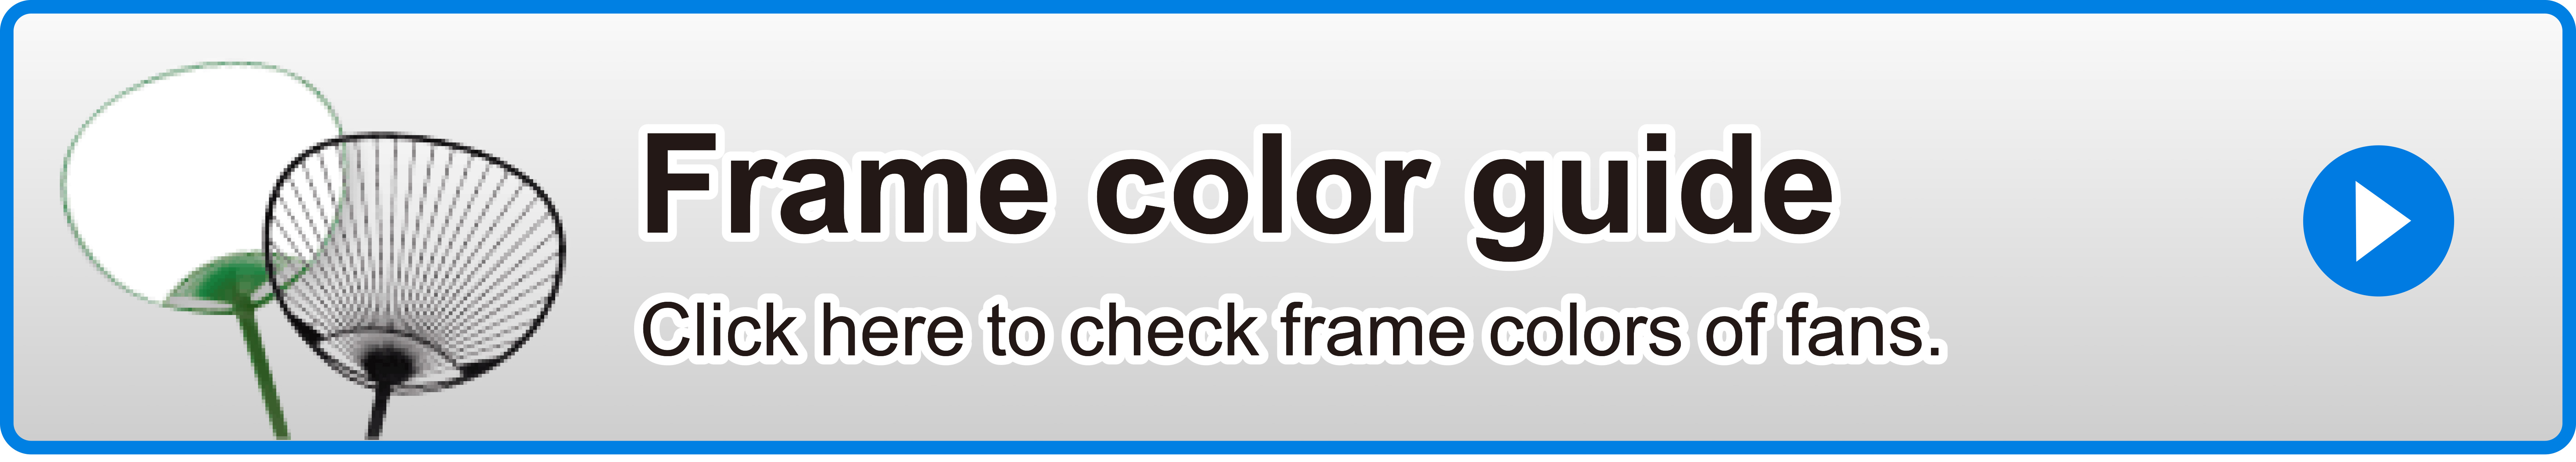 Frame color guide Click here to check frame colors of fans.